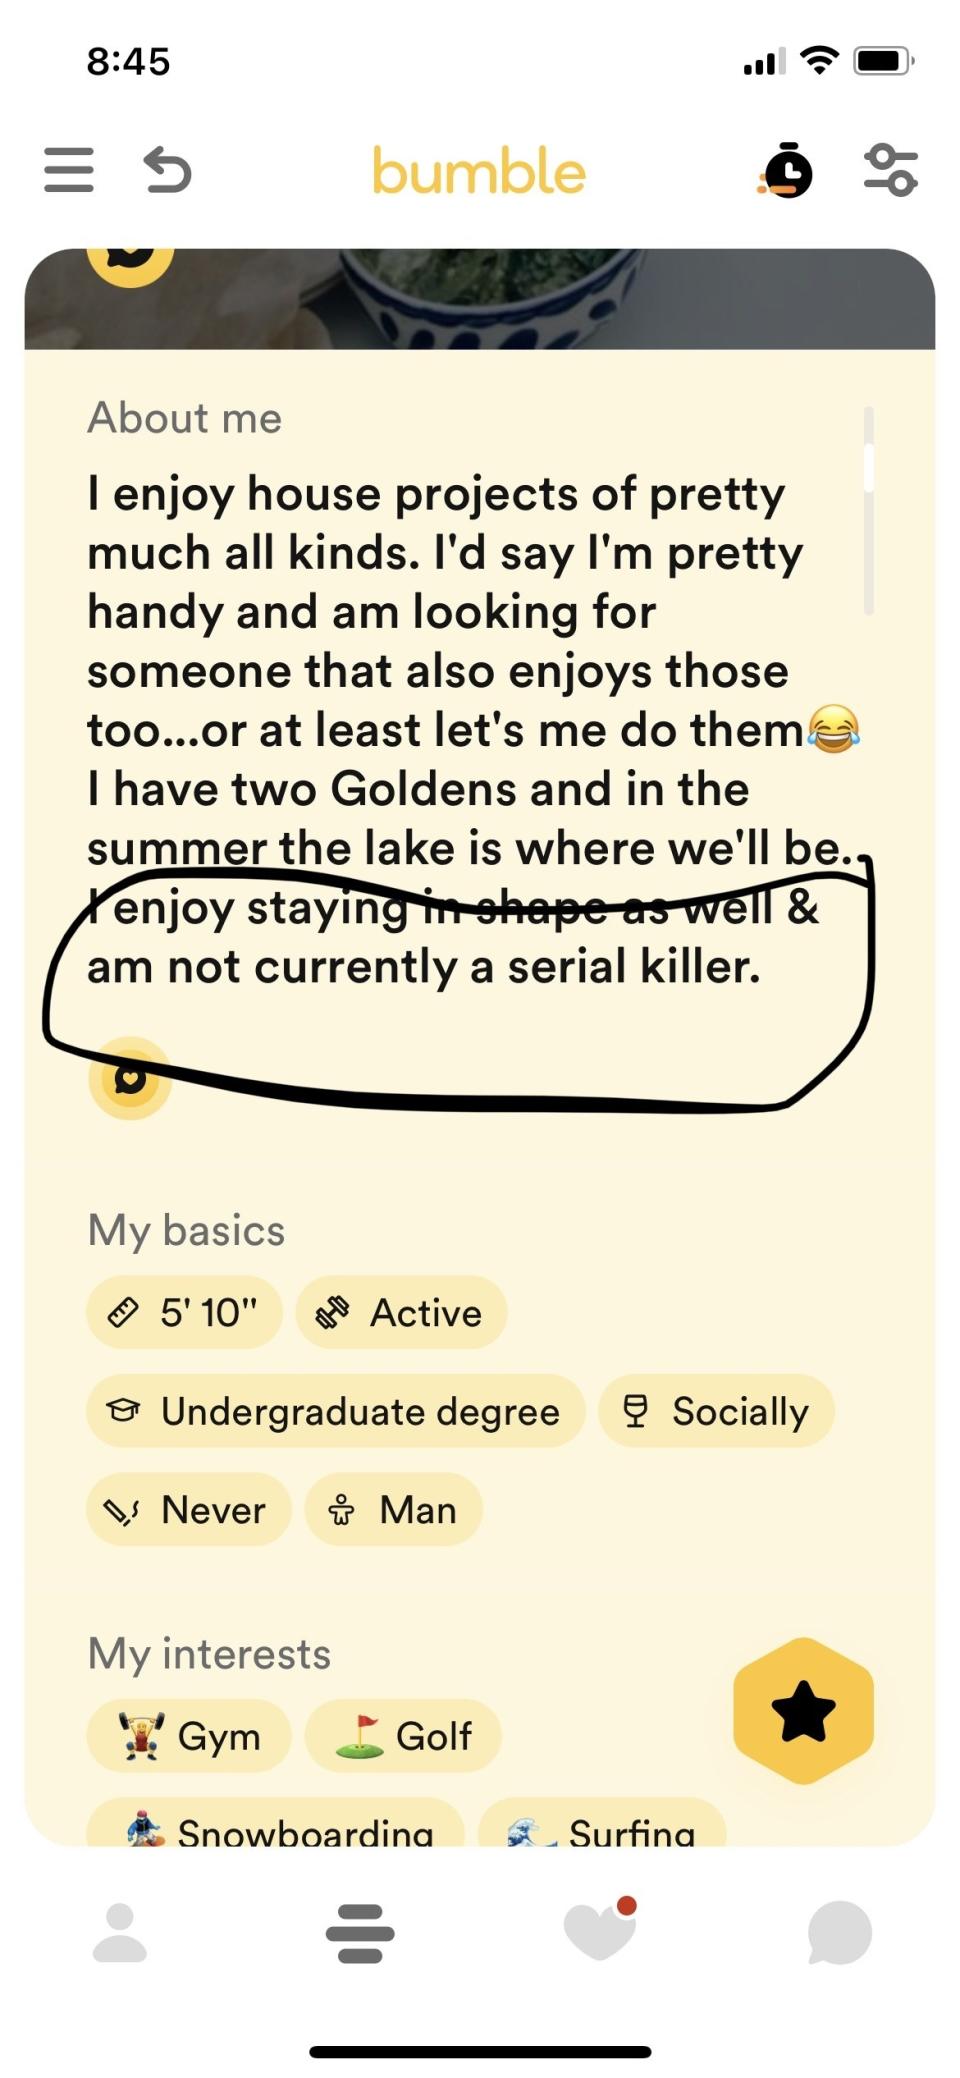 This about me section ends with the sentence "I enjoy staying in shape and am not currently a serial killer"